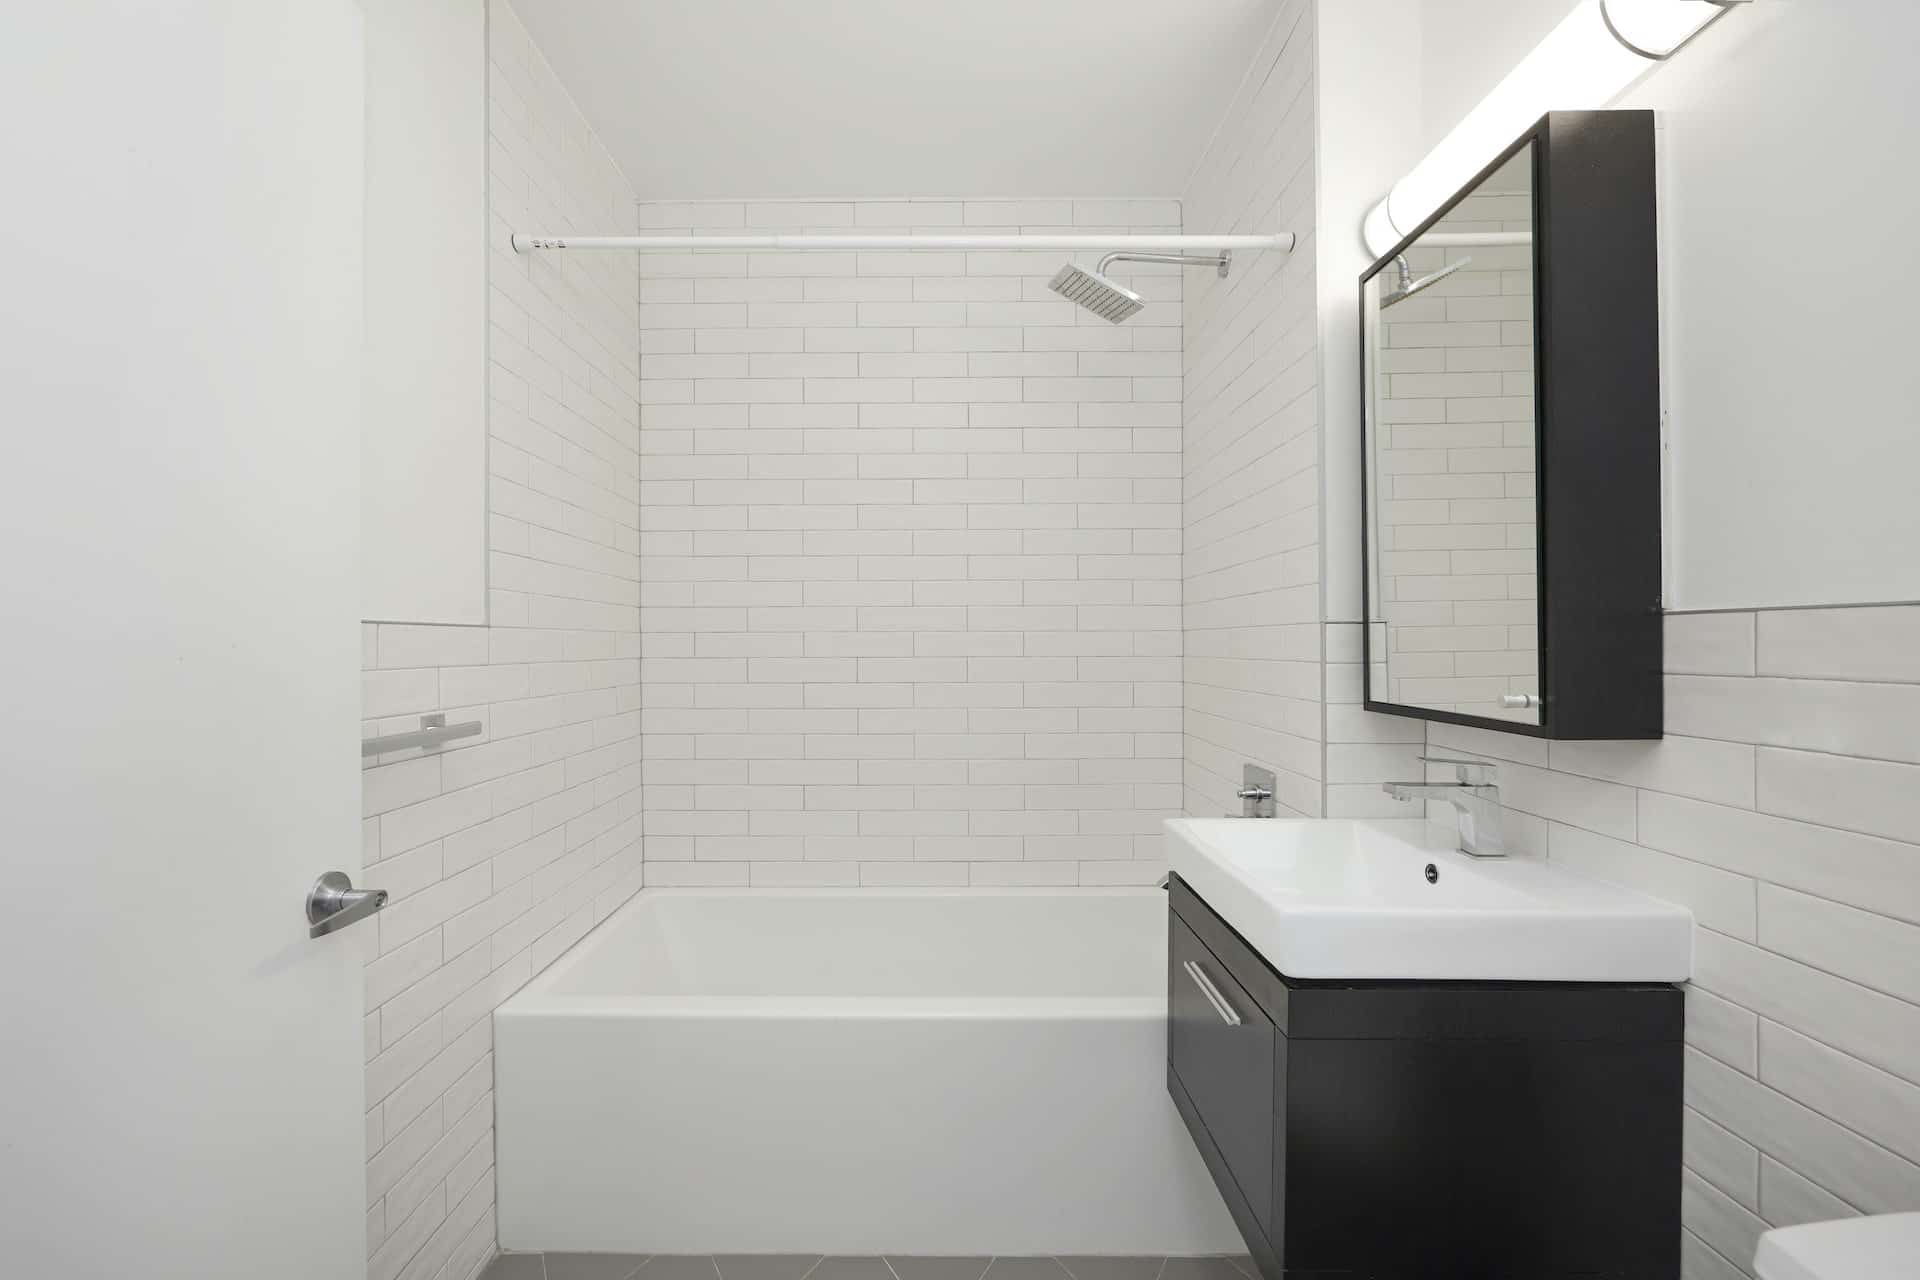 Bathroom at 83 Bushwick Place apartments with a single vanity, square mirror, tile walls, and a soaking tub with shower.